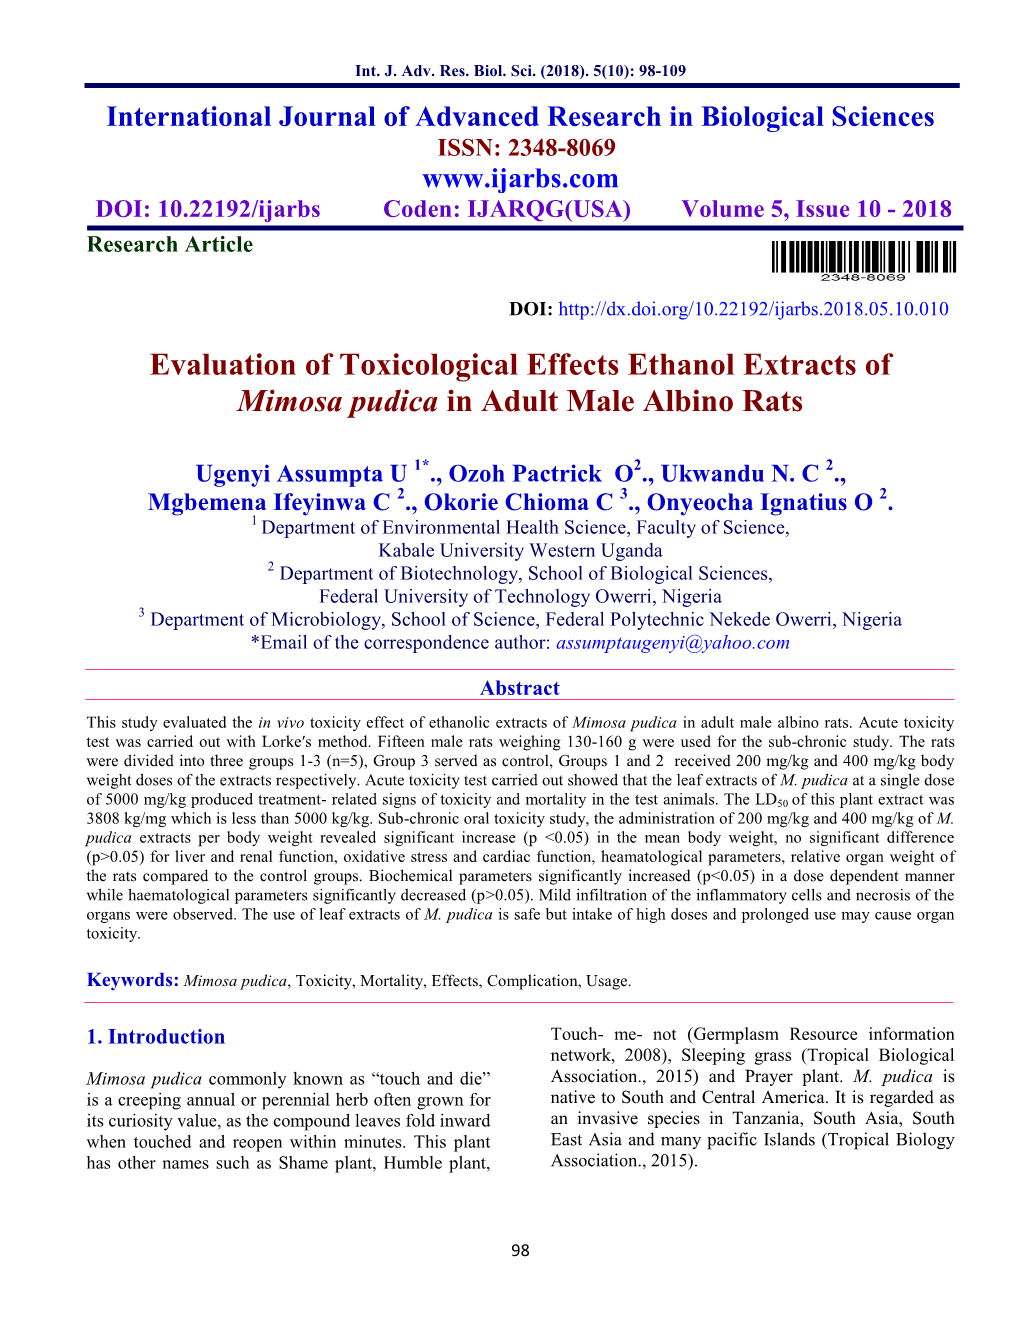 Evaluation of Toxicological Effects Ethanol Extracts of Mimosa Pudica in Adult Male Albino Rats